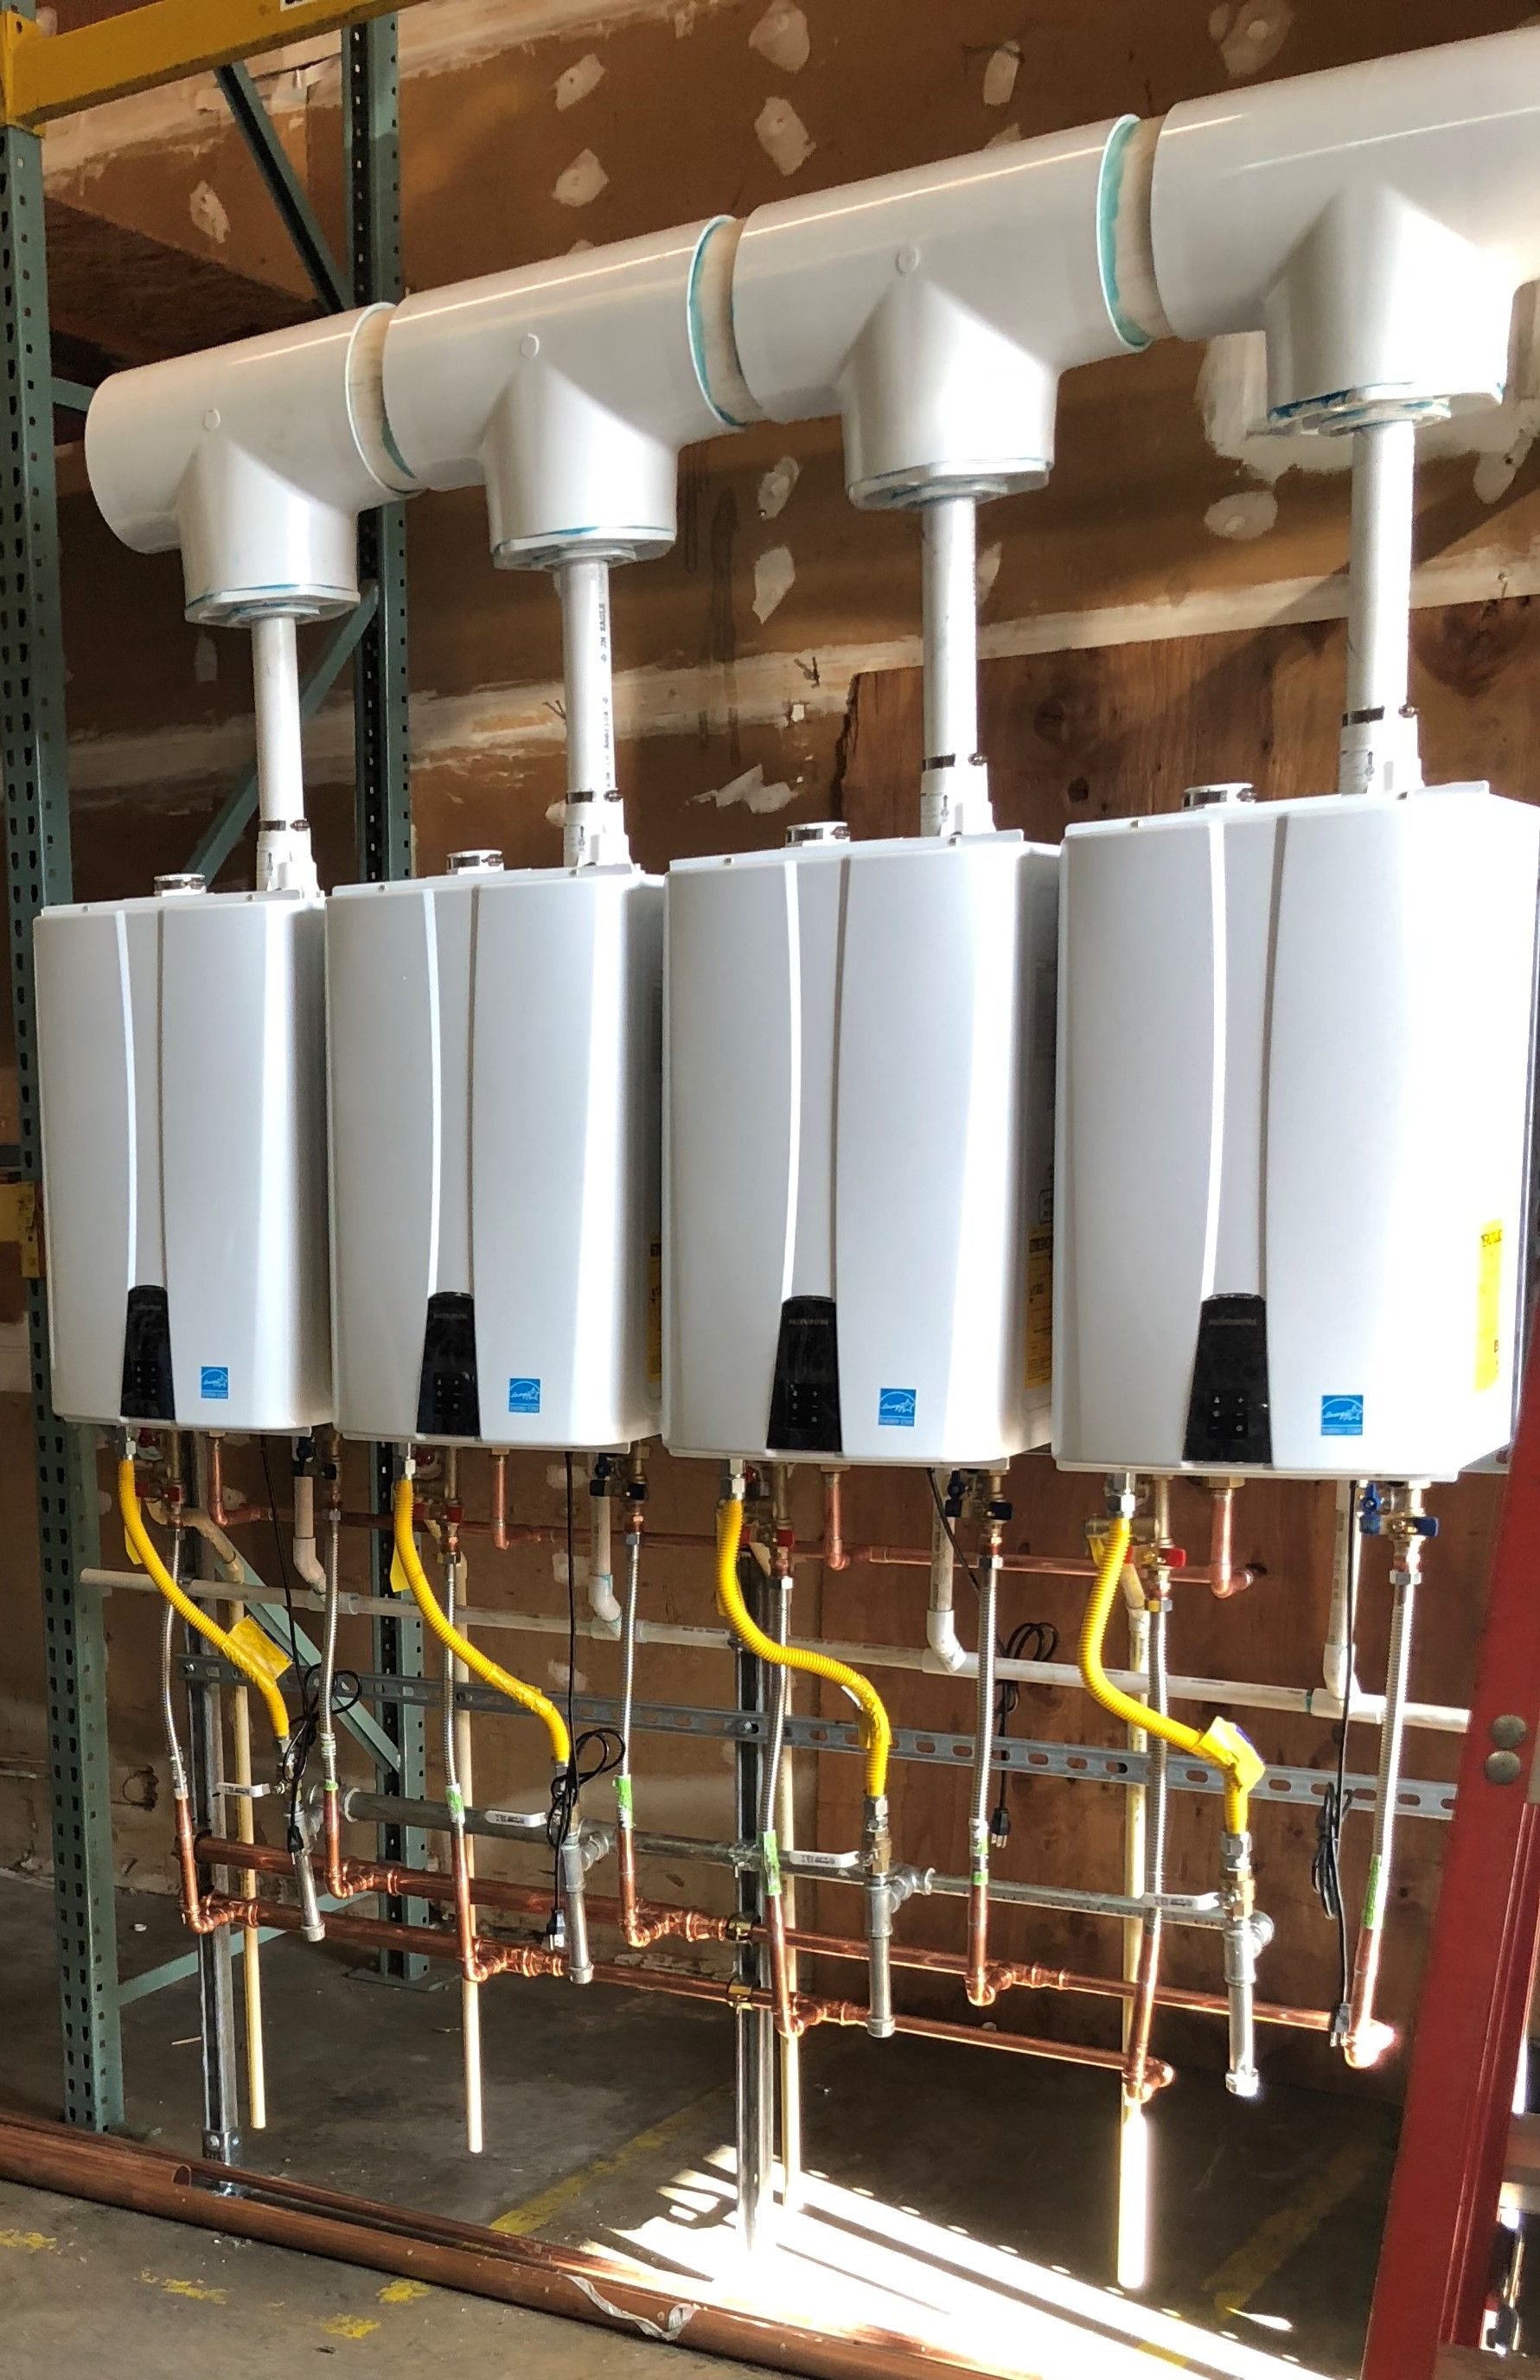 Four tankless water heaters in a row.